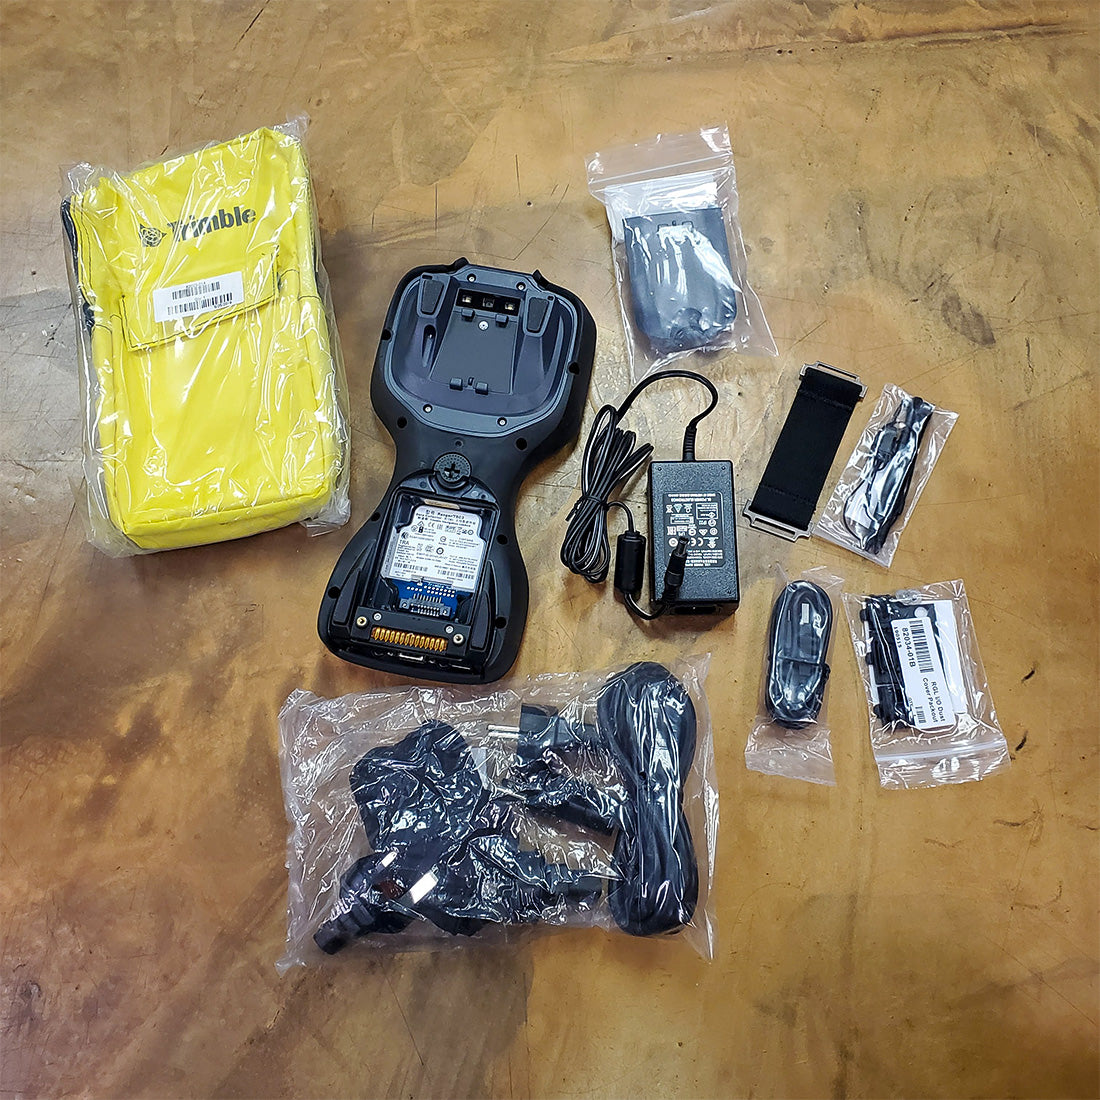 For Sale USED Trimble TSC3 Data Collector with Trimble Access, No Radio